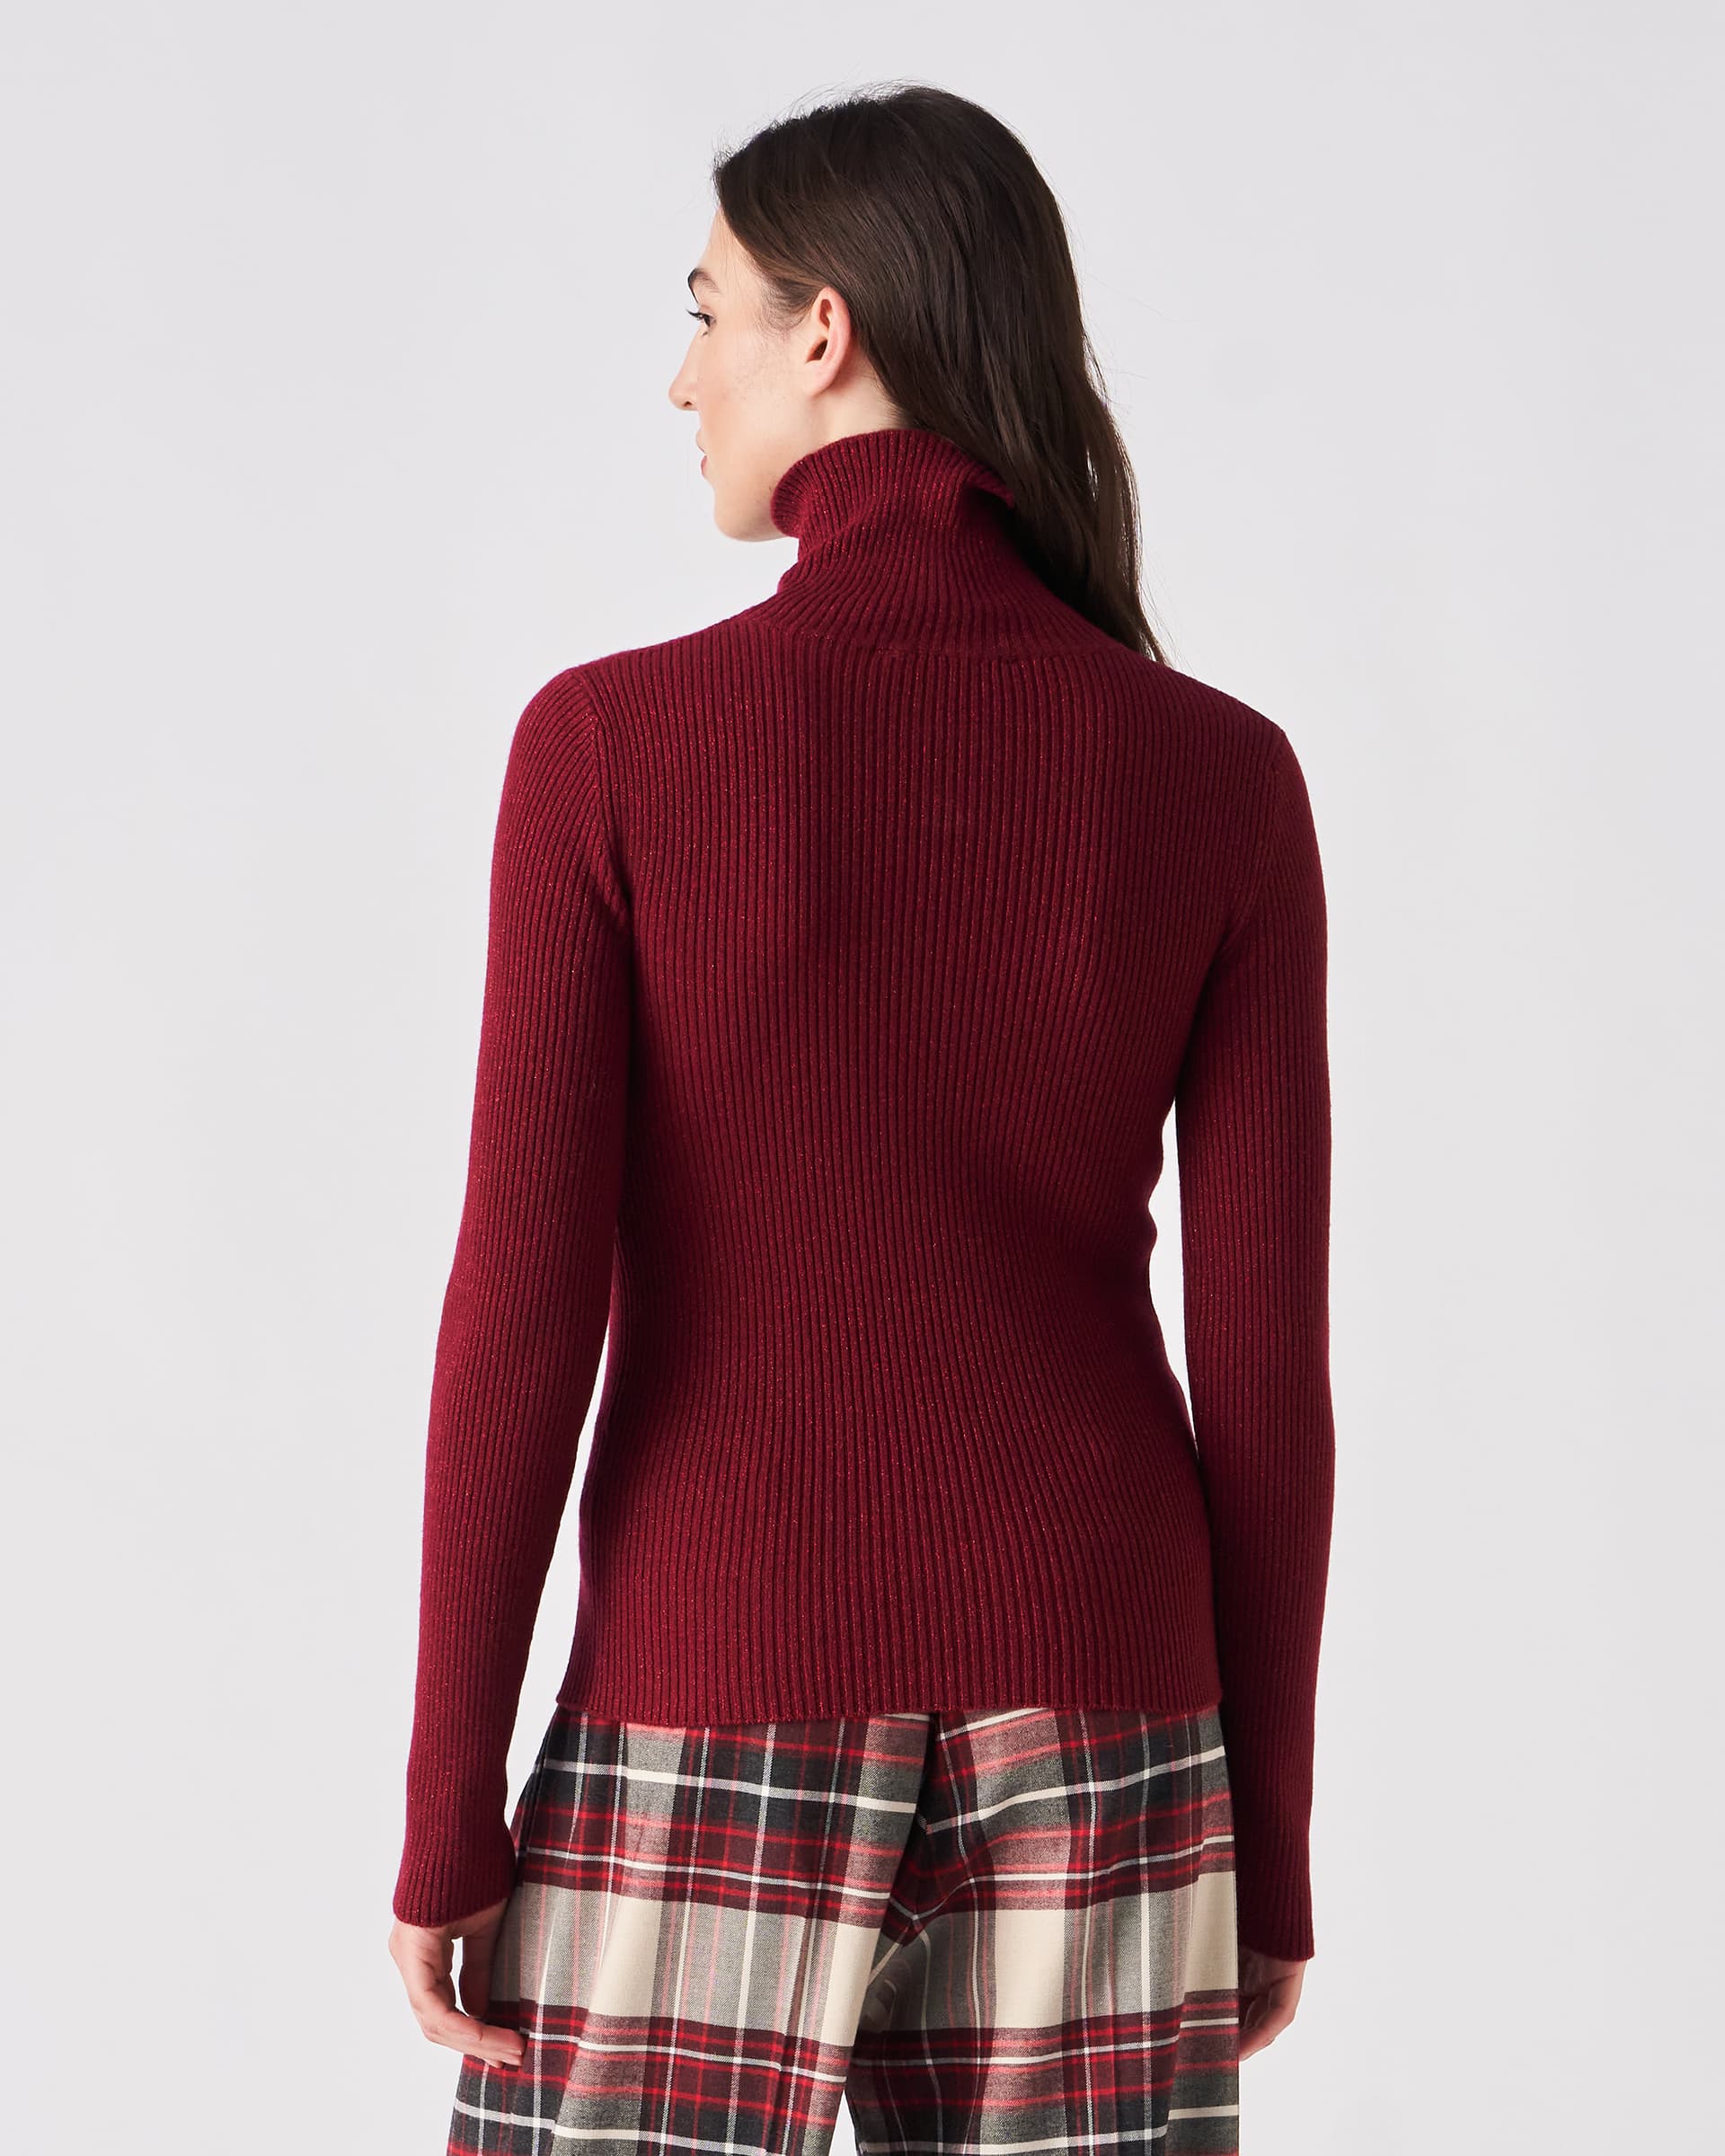 The Market Store | Ribbed Turtleneck Sweater